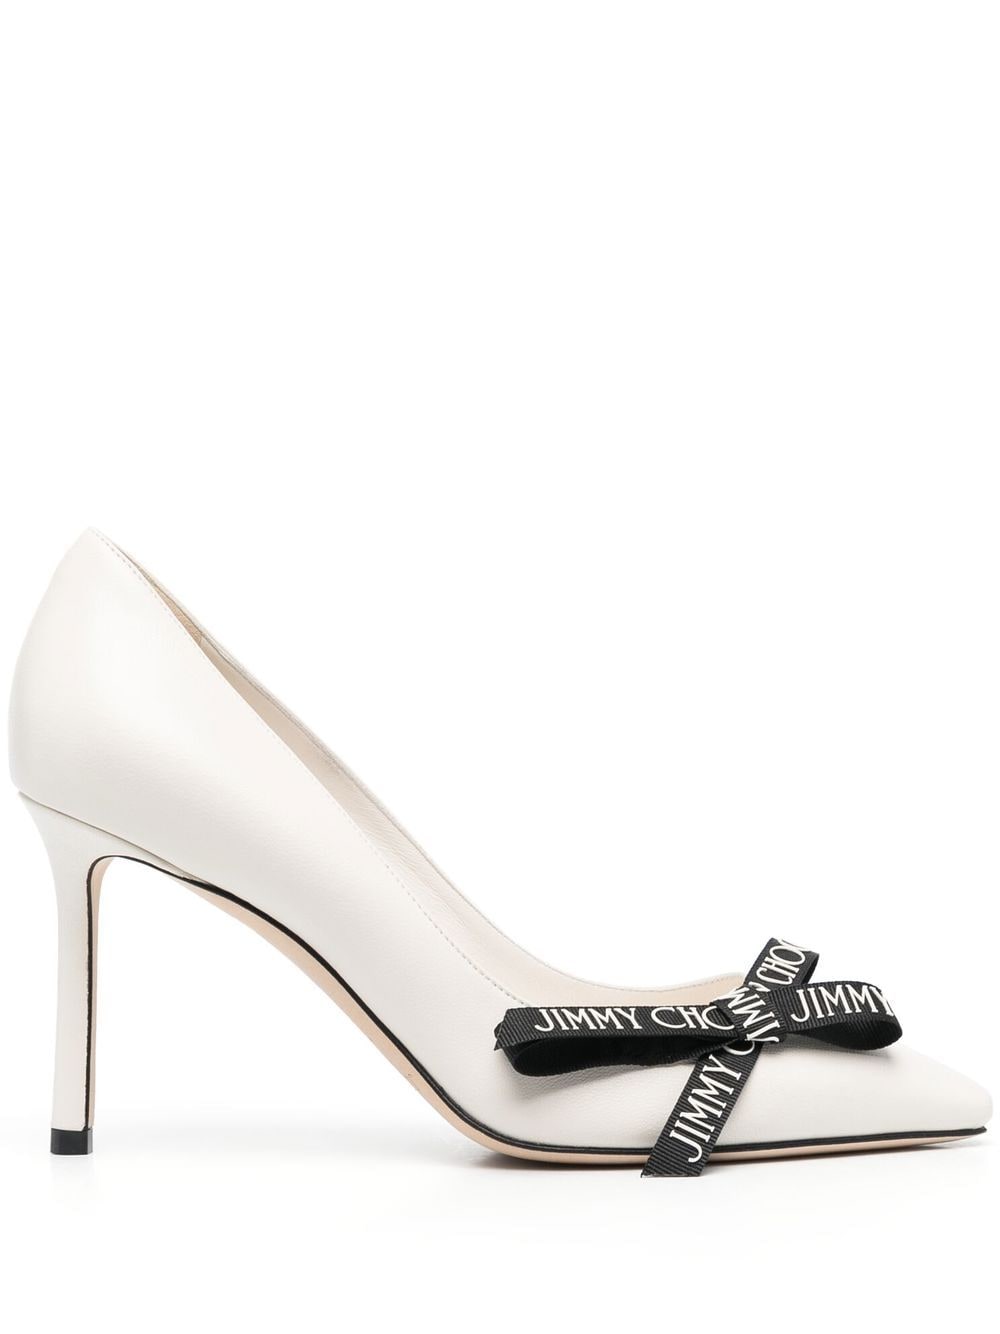 Jimmy Choo 80mm Bow Detailing Pumps In White